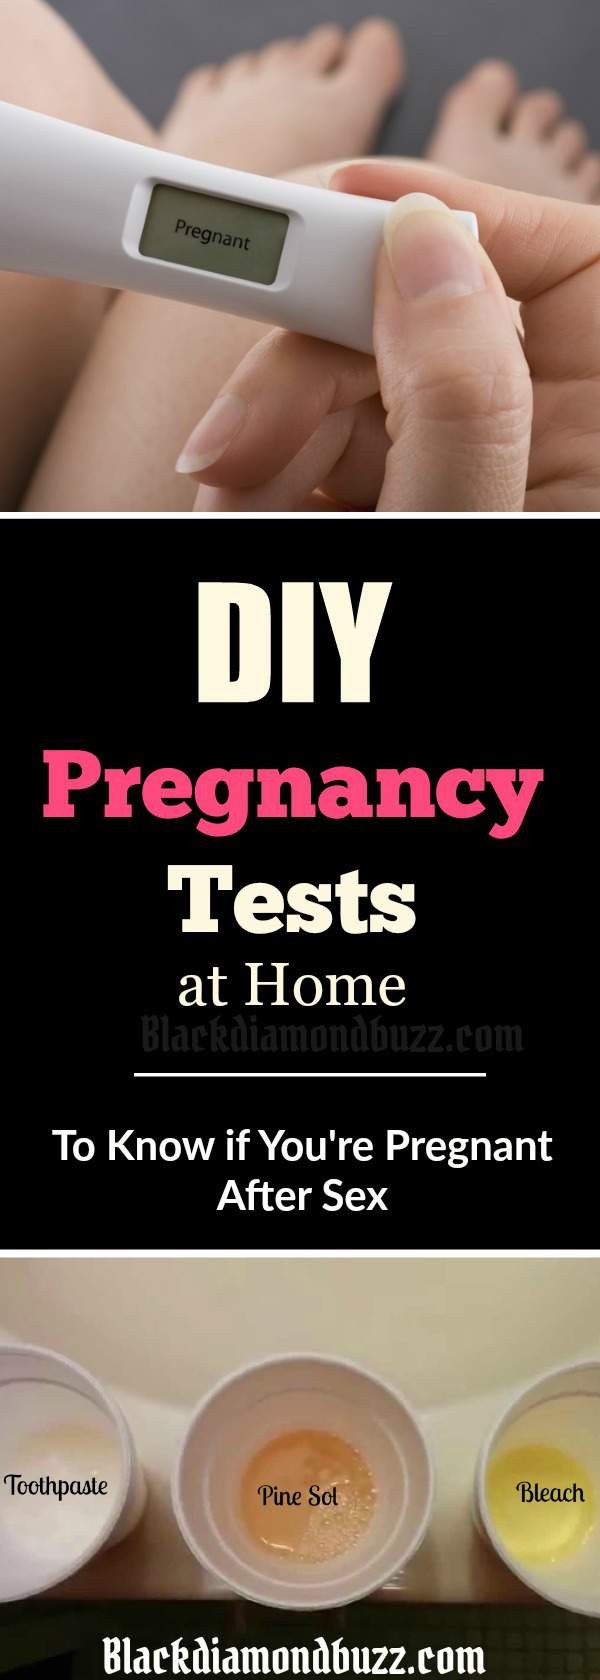 Home Pregnancy Test DIY
 diy home pregnancy test Do It Your Self